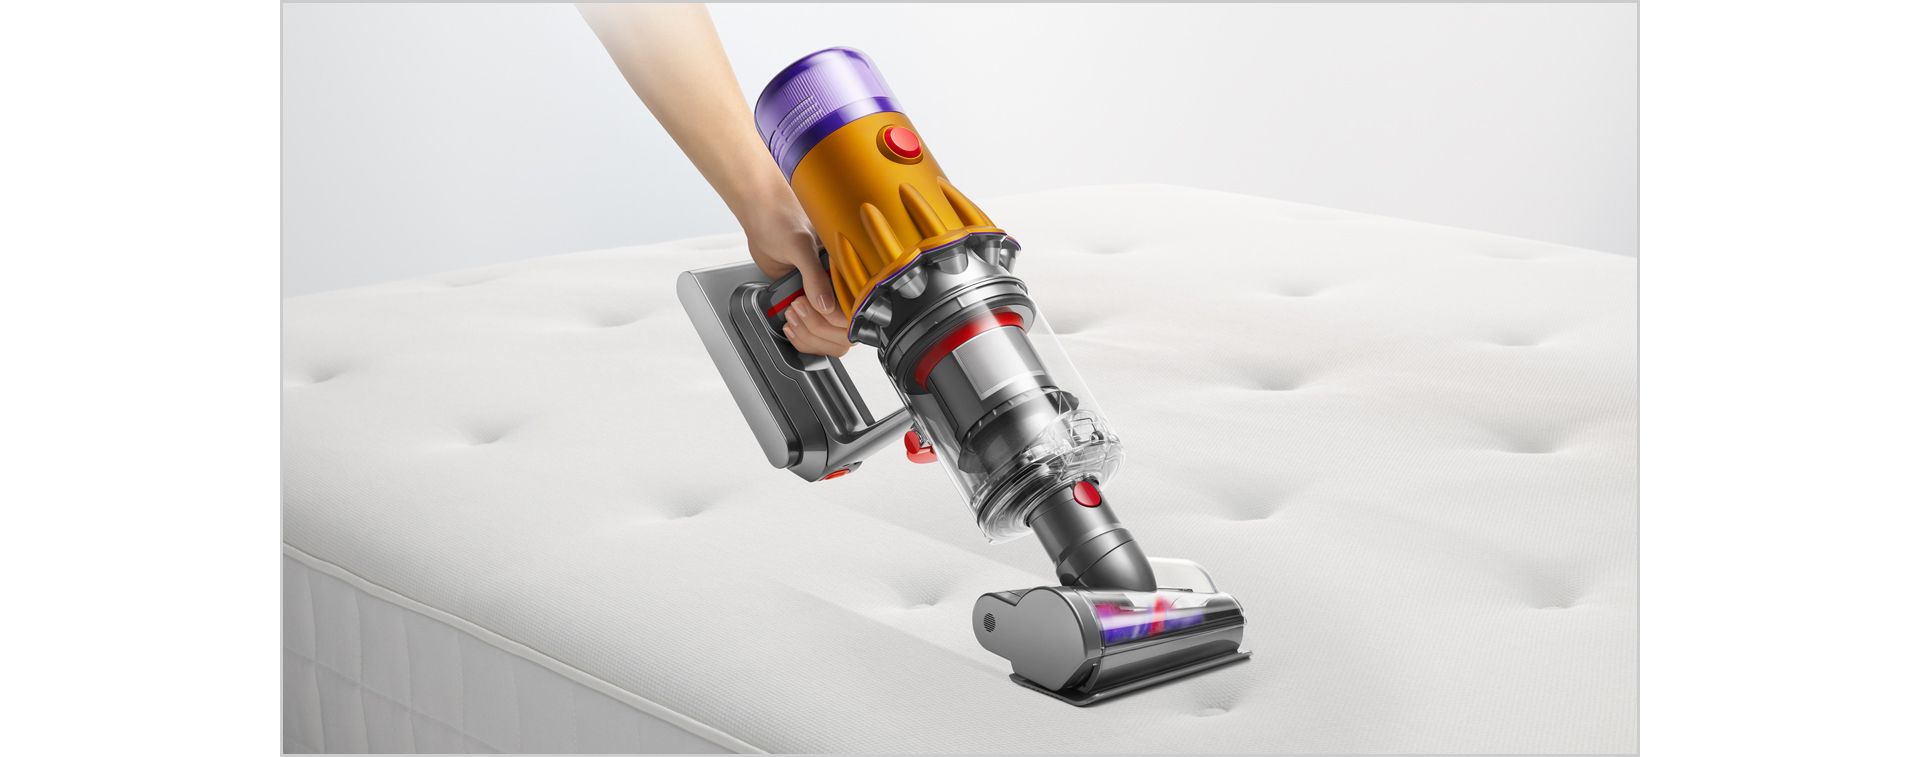 dyson dc43h mattress handheld vacuum cleaner review